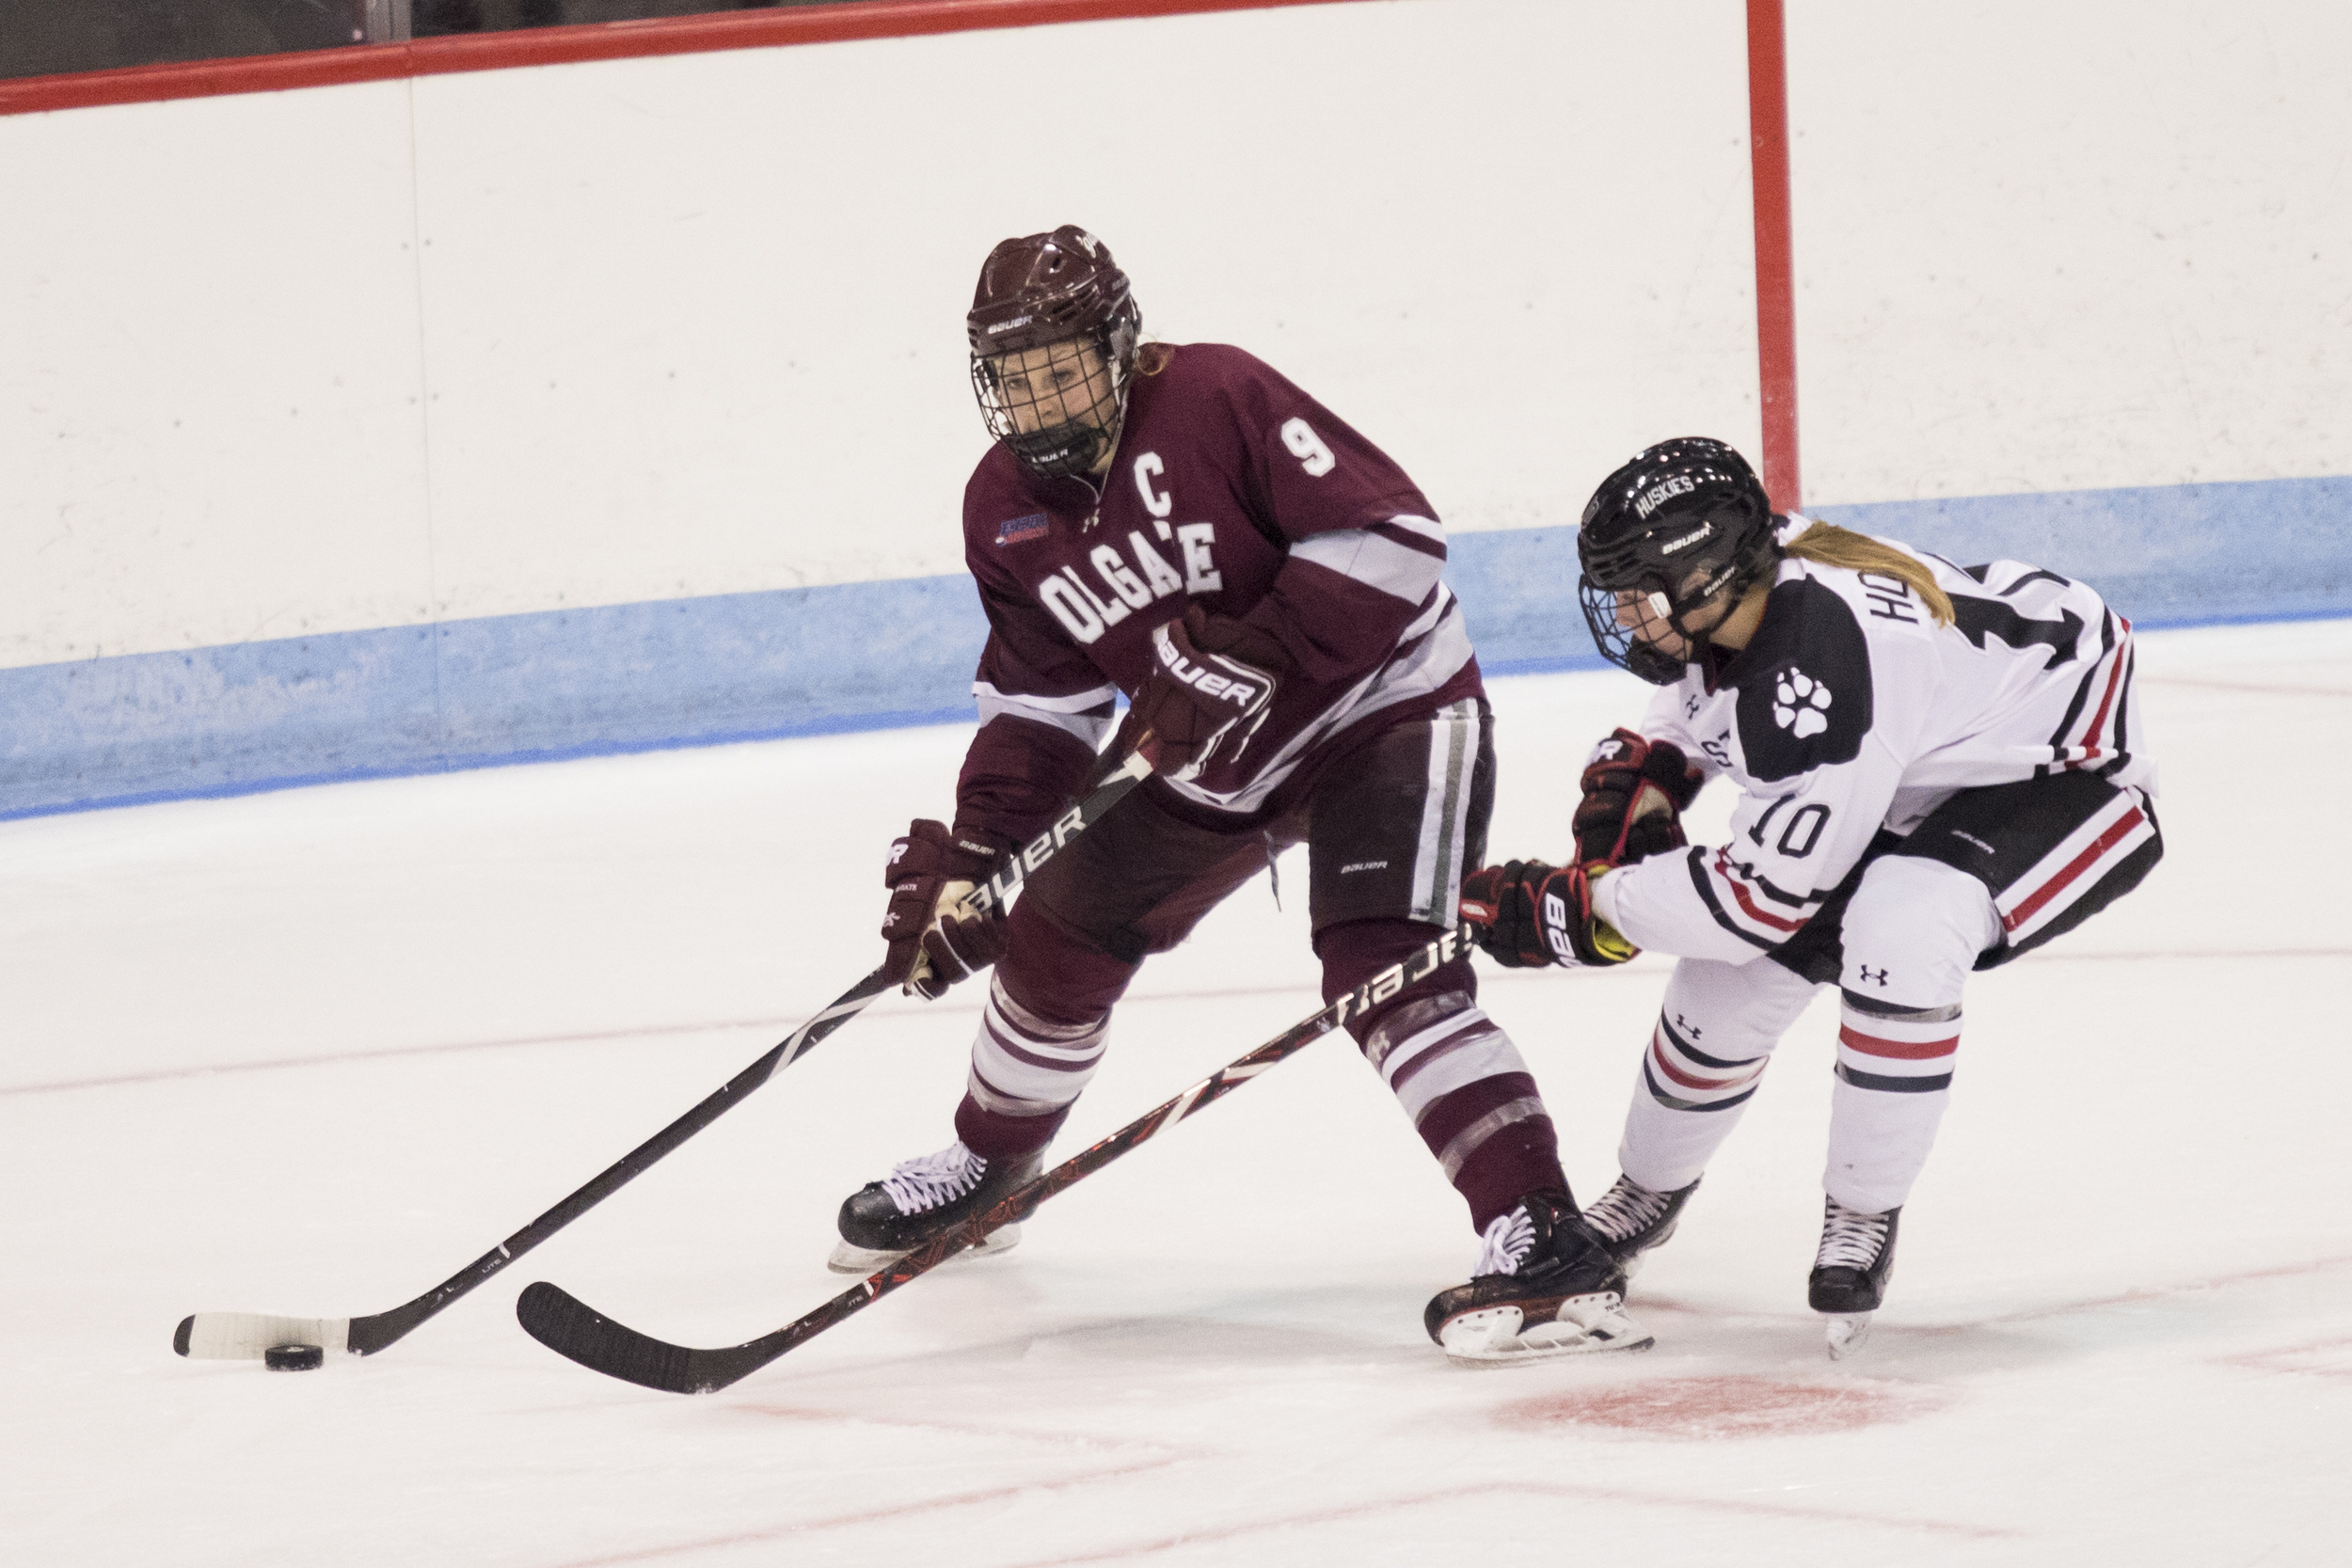 Northeastern defender Brooke Hobson defends Colgate forward Jessie Eldridge during an NCAA game at Matthews Arena in Boston, MA on Oct. 12, 2018. (Photo by Michelle Jay)